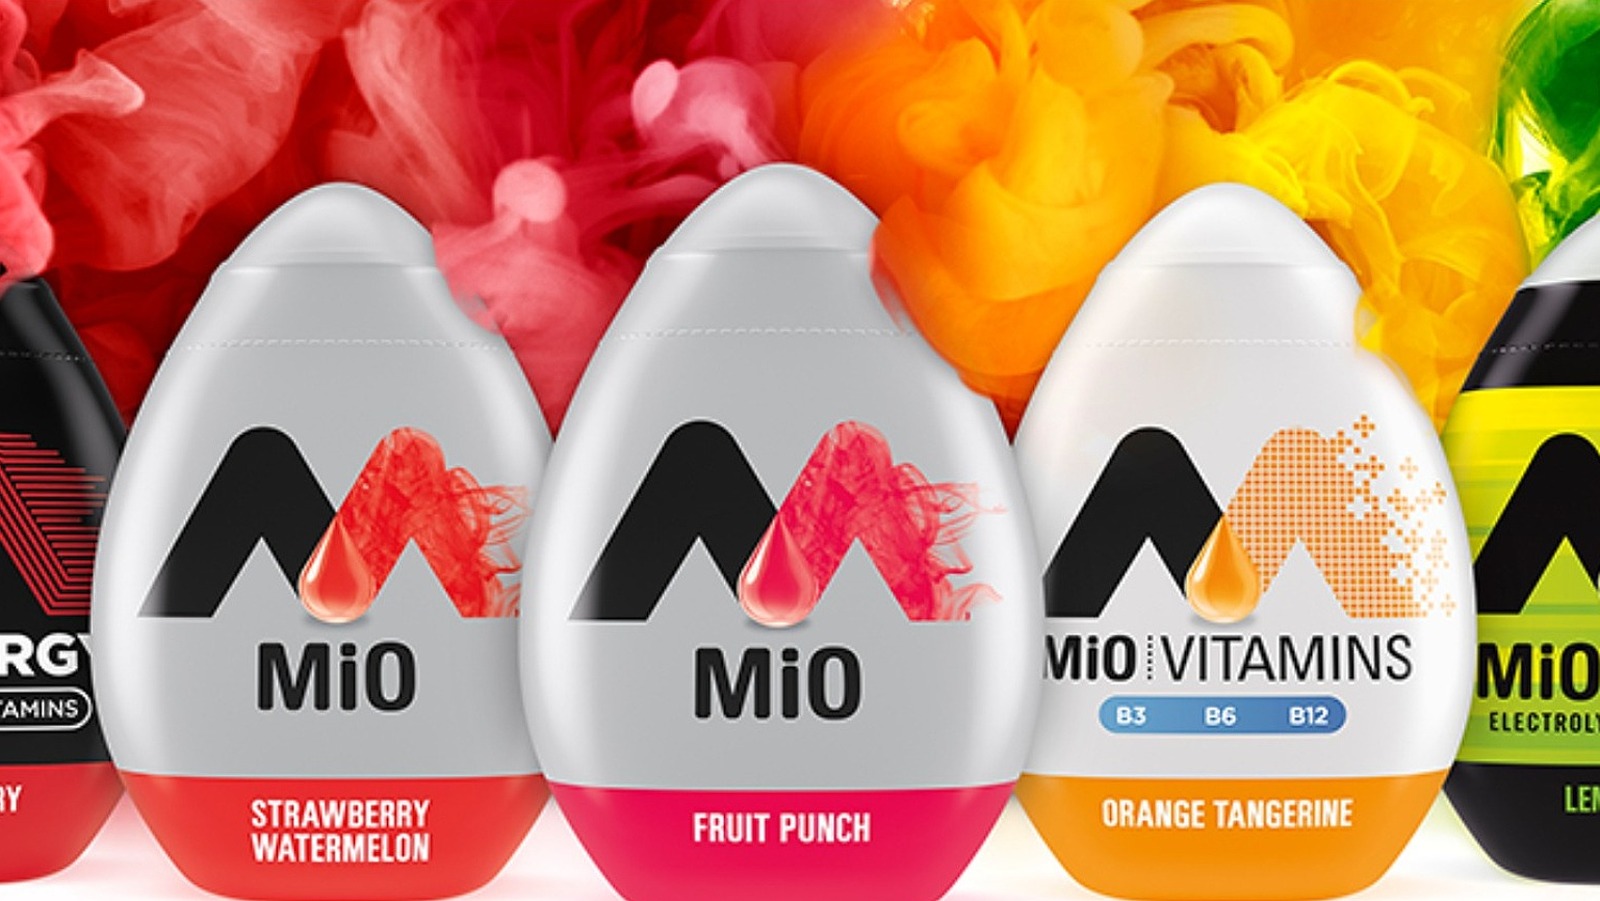 https://www.tastingtable.com/img/gallery/ranking-mio-flavors-from-worst-to-best/l-intro-1648566523.jpg